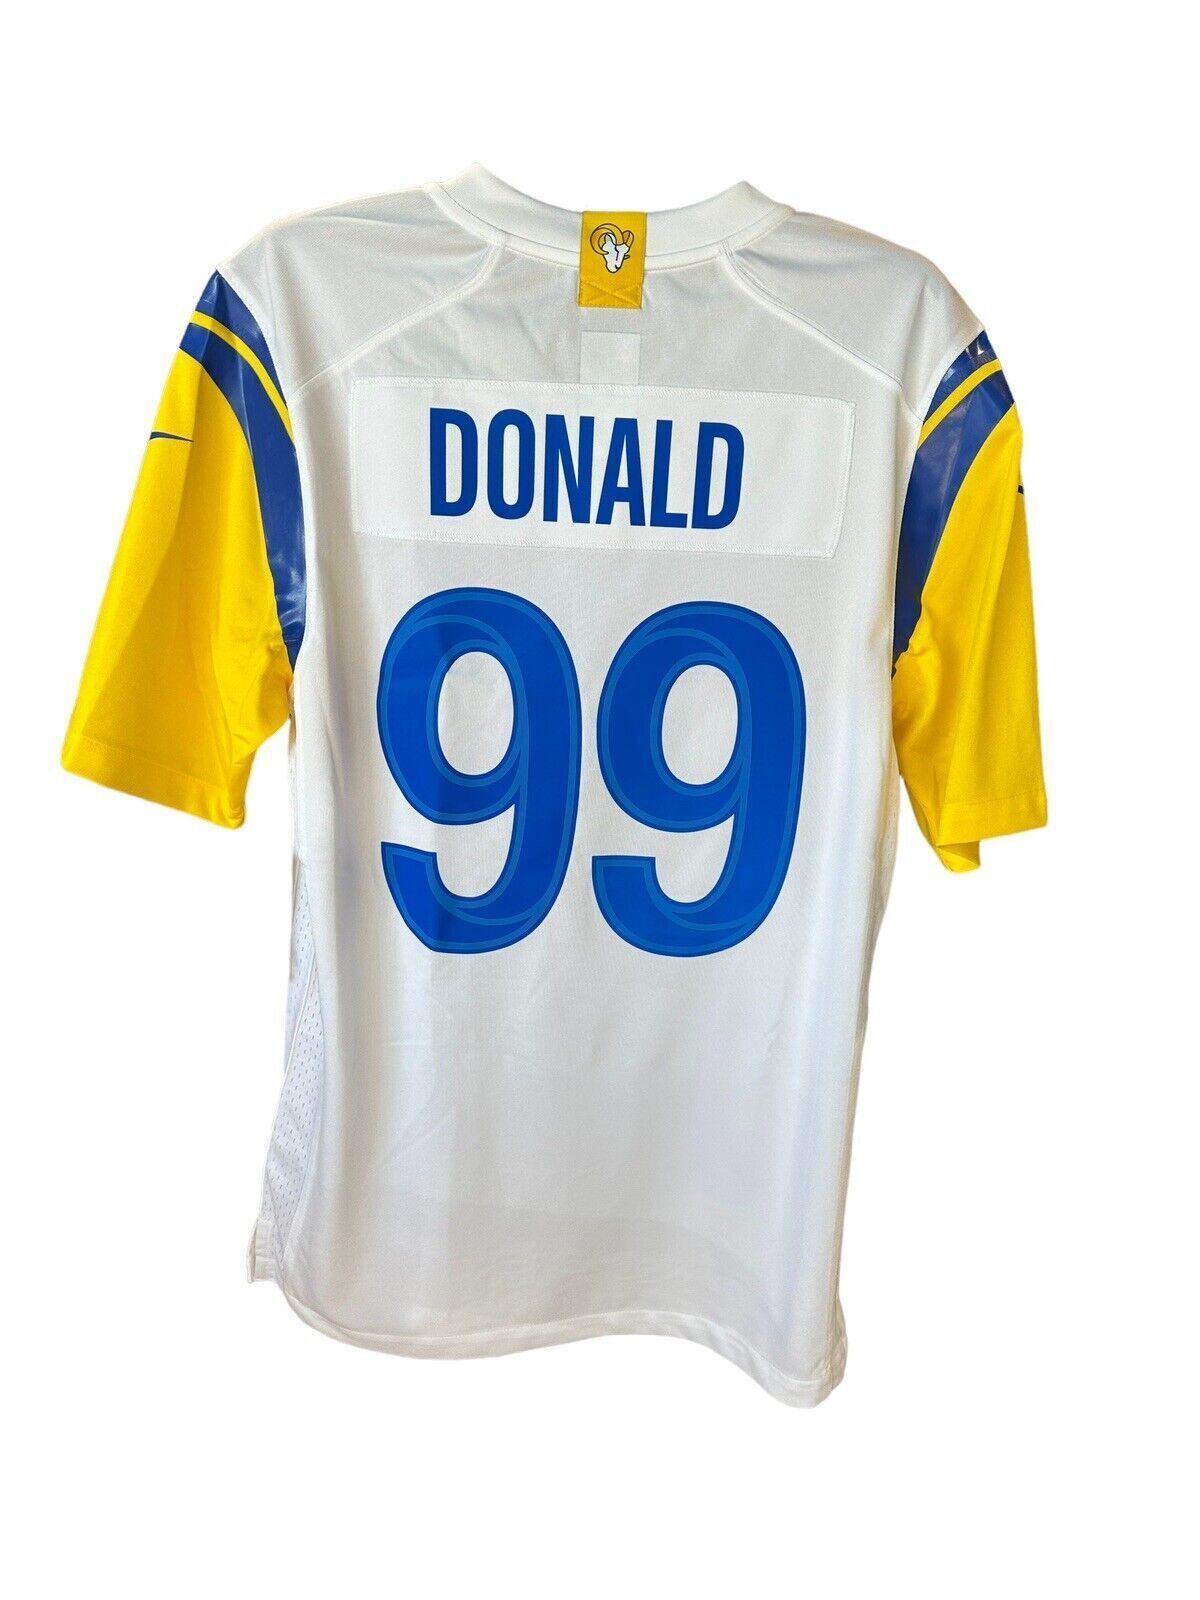 Nike NFL Los Angeles Rams Jersey DINALD 99 Mens Small